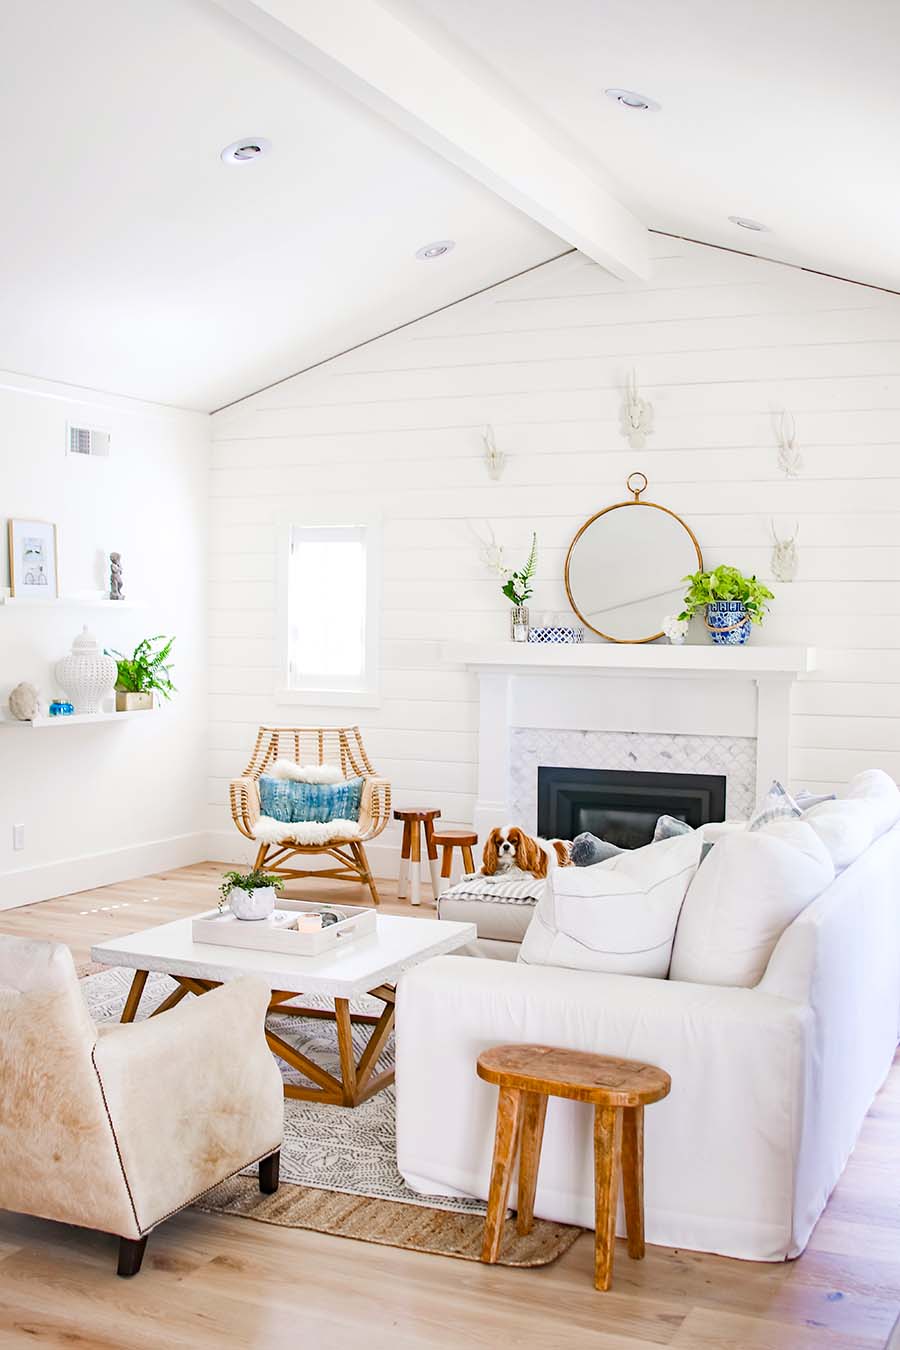 The white living room decor has pops of wood in a mirror and a step stool.